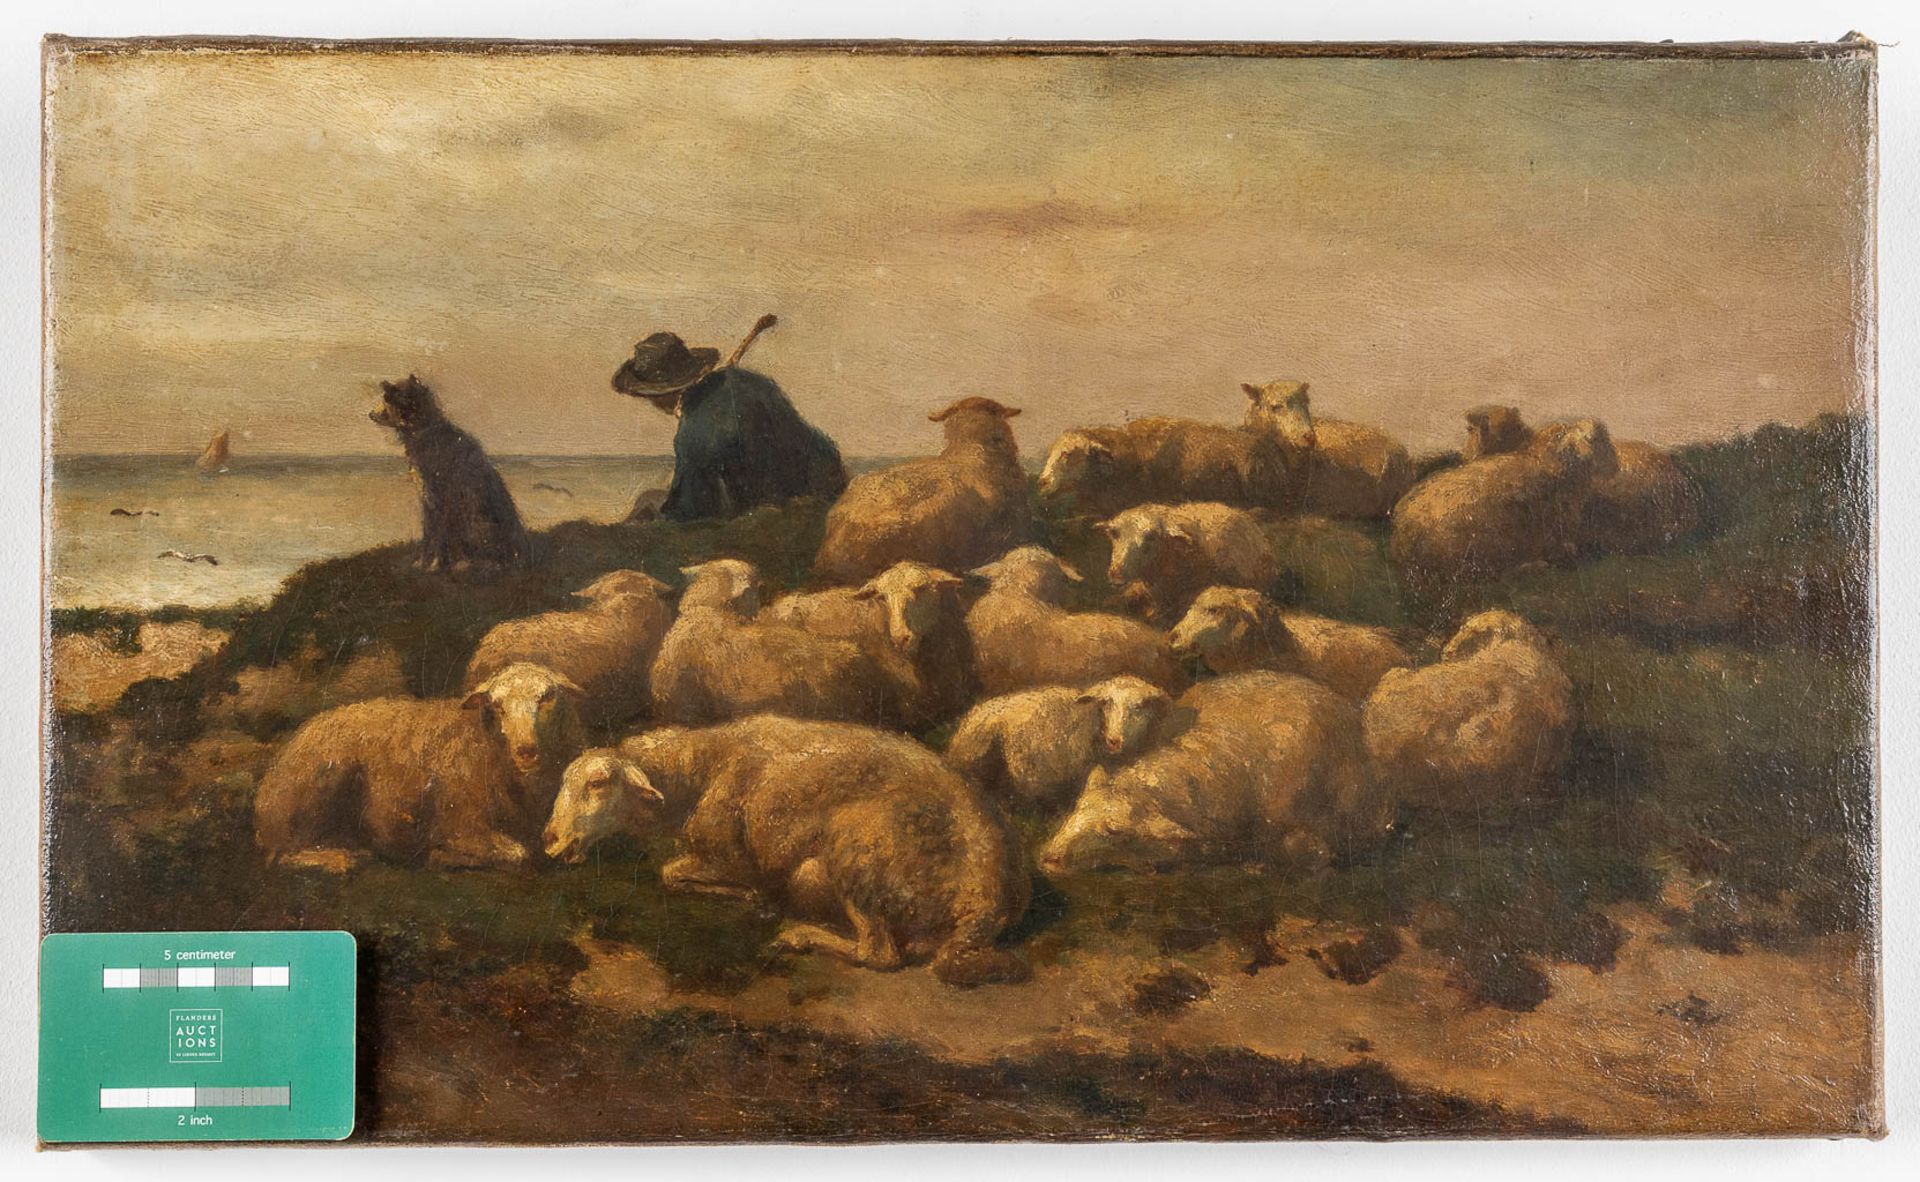 Edouard WOUTERMAERTENS (1819-1897) 'Sheep and shepperd', oil on canvas. (W: 50 x H: 30 cm) - Image 2 of 8